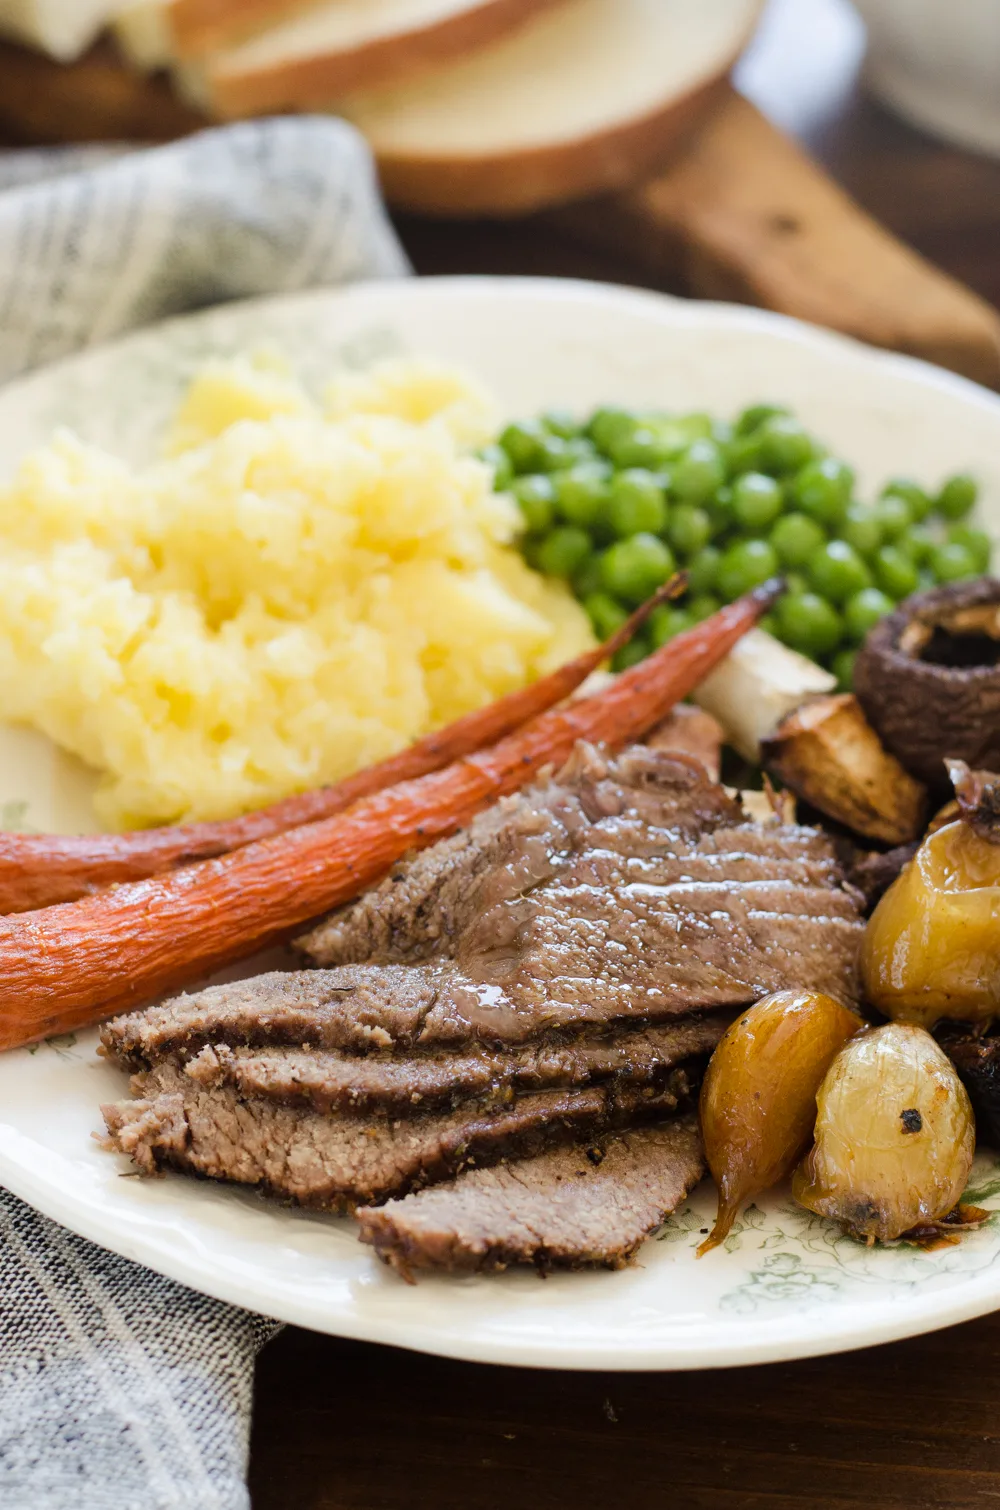 A plate of grass-fed roast beef chuck roast on a plate with mashed potatoes, green peas, and roasted veggies around it.